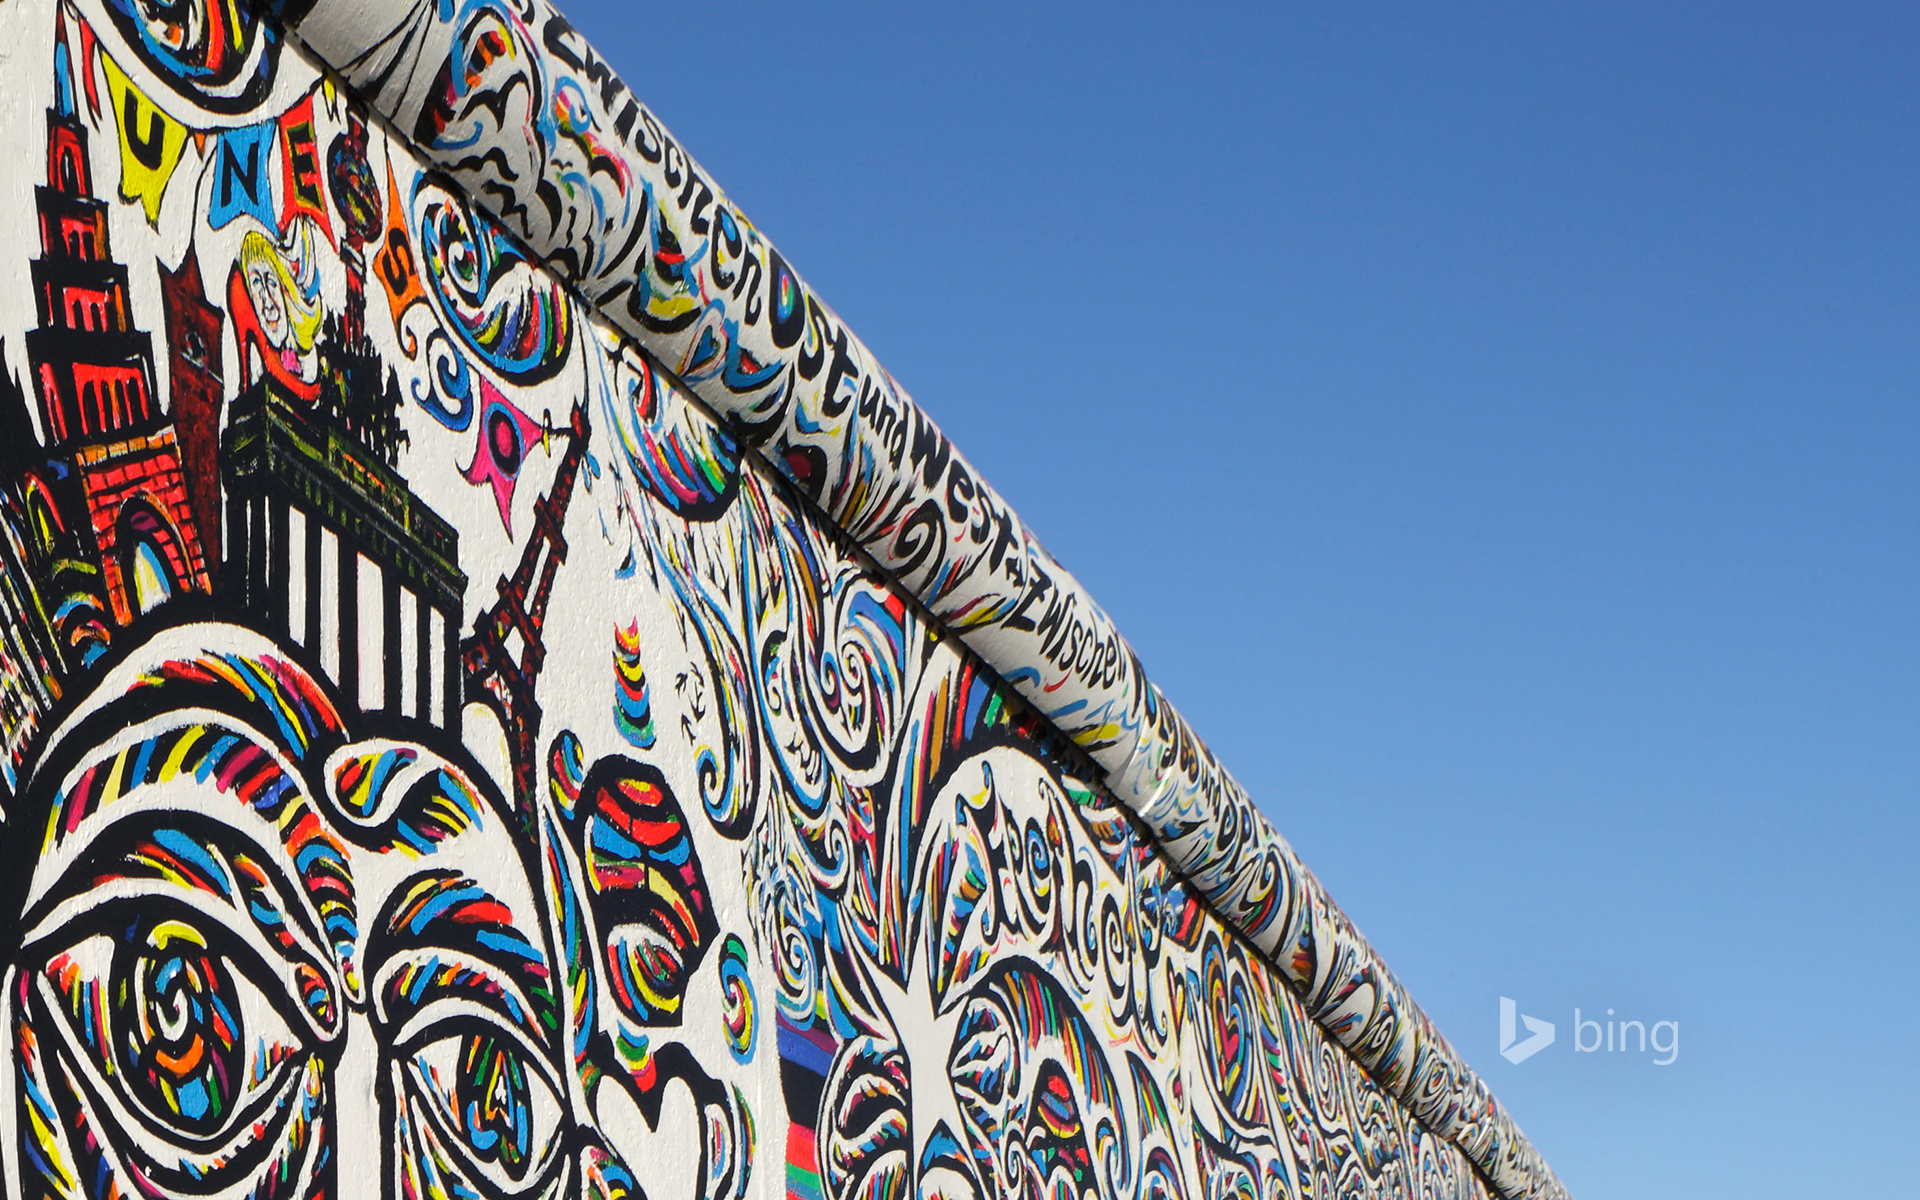 Shamil Gimajew’s ‘We Are A People’ on the renovated East Side Gallery of the Berlin Wall, Berlin, Germany